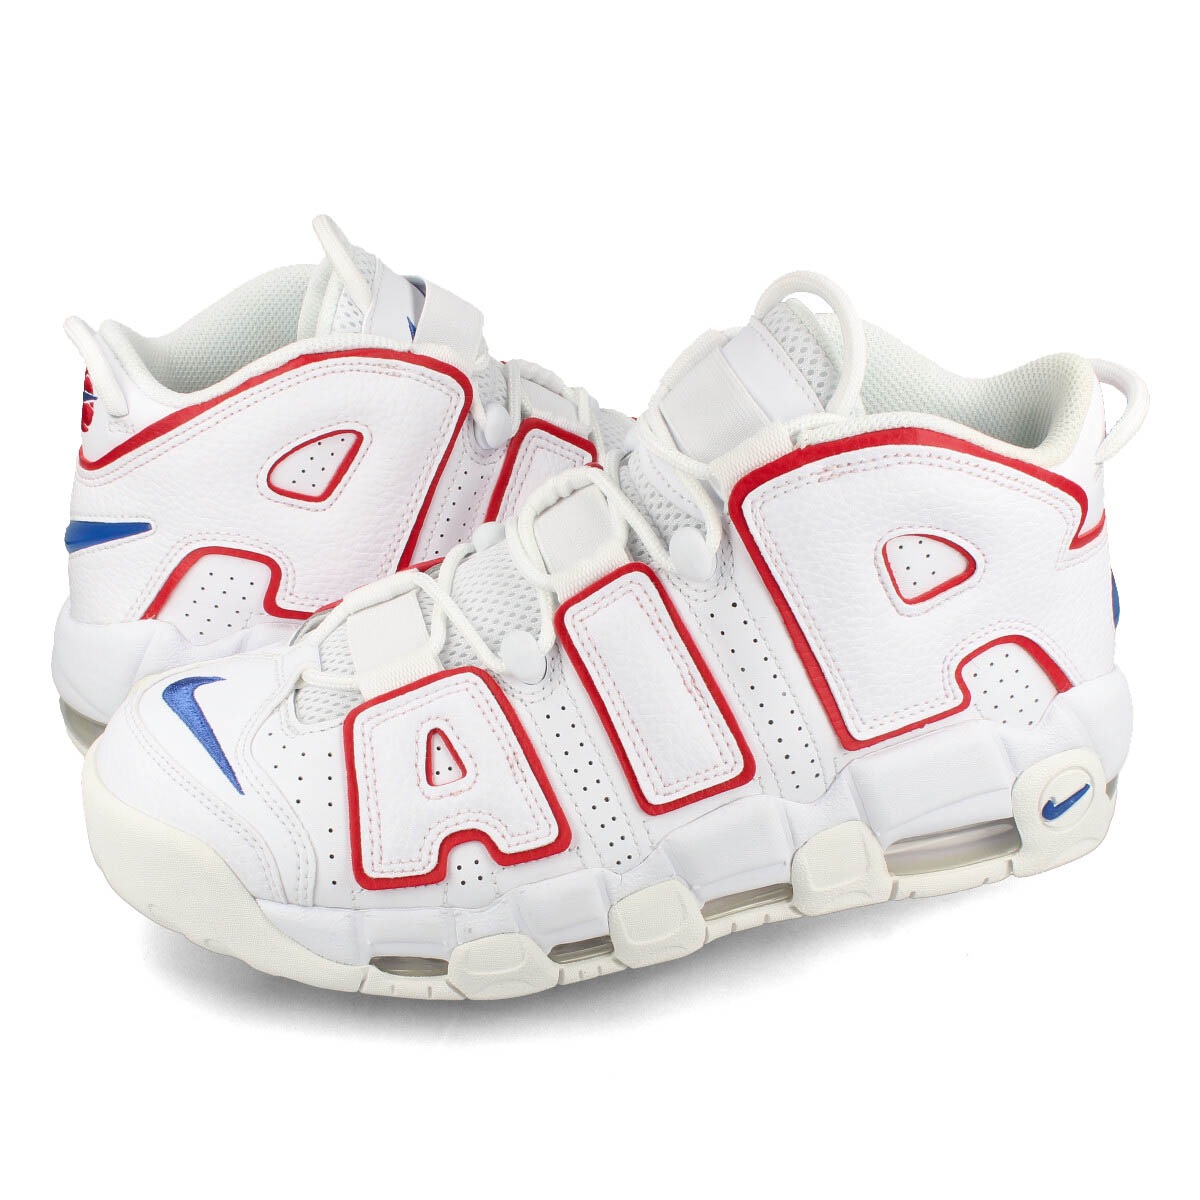 NIKEAIR MORE UPTEMPO ’96 WHITE/GAME ROYAL/UNIVERSITY RED 【USA HOOPS】